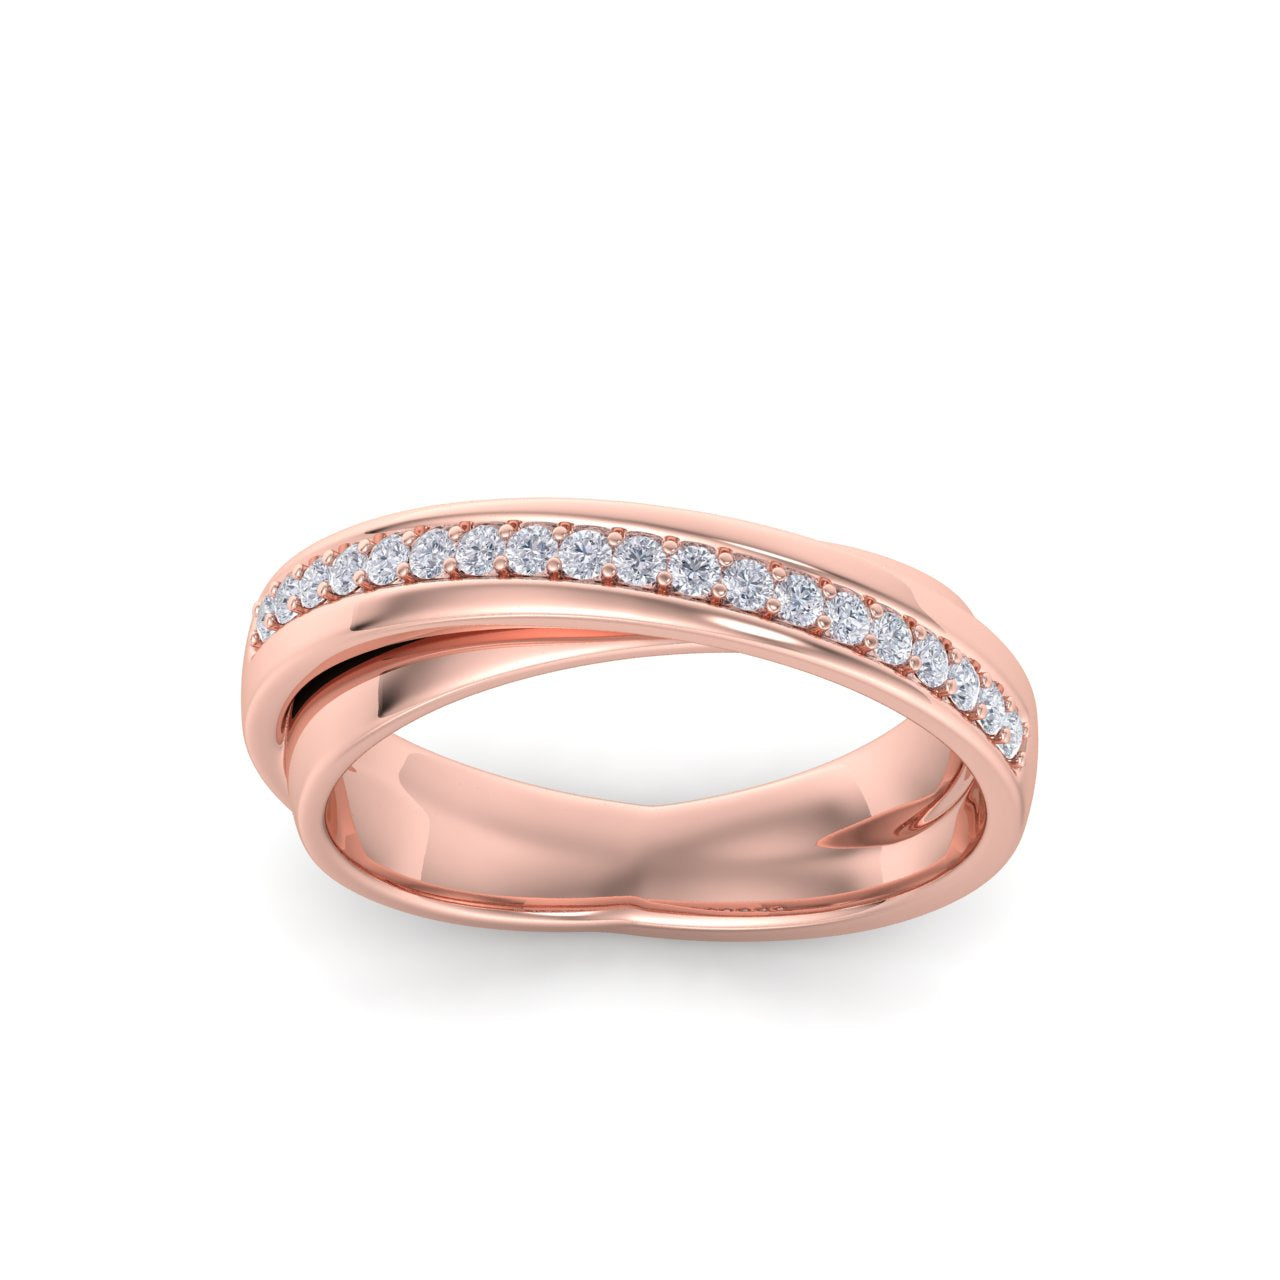 Pavé diamond ring in rose gold with white diamonds of 0.18 ct in weight